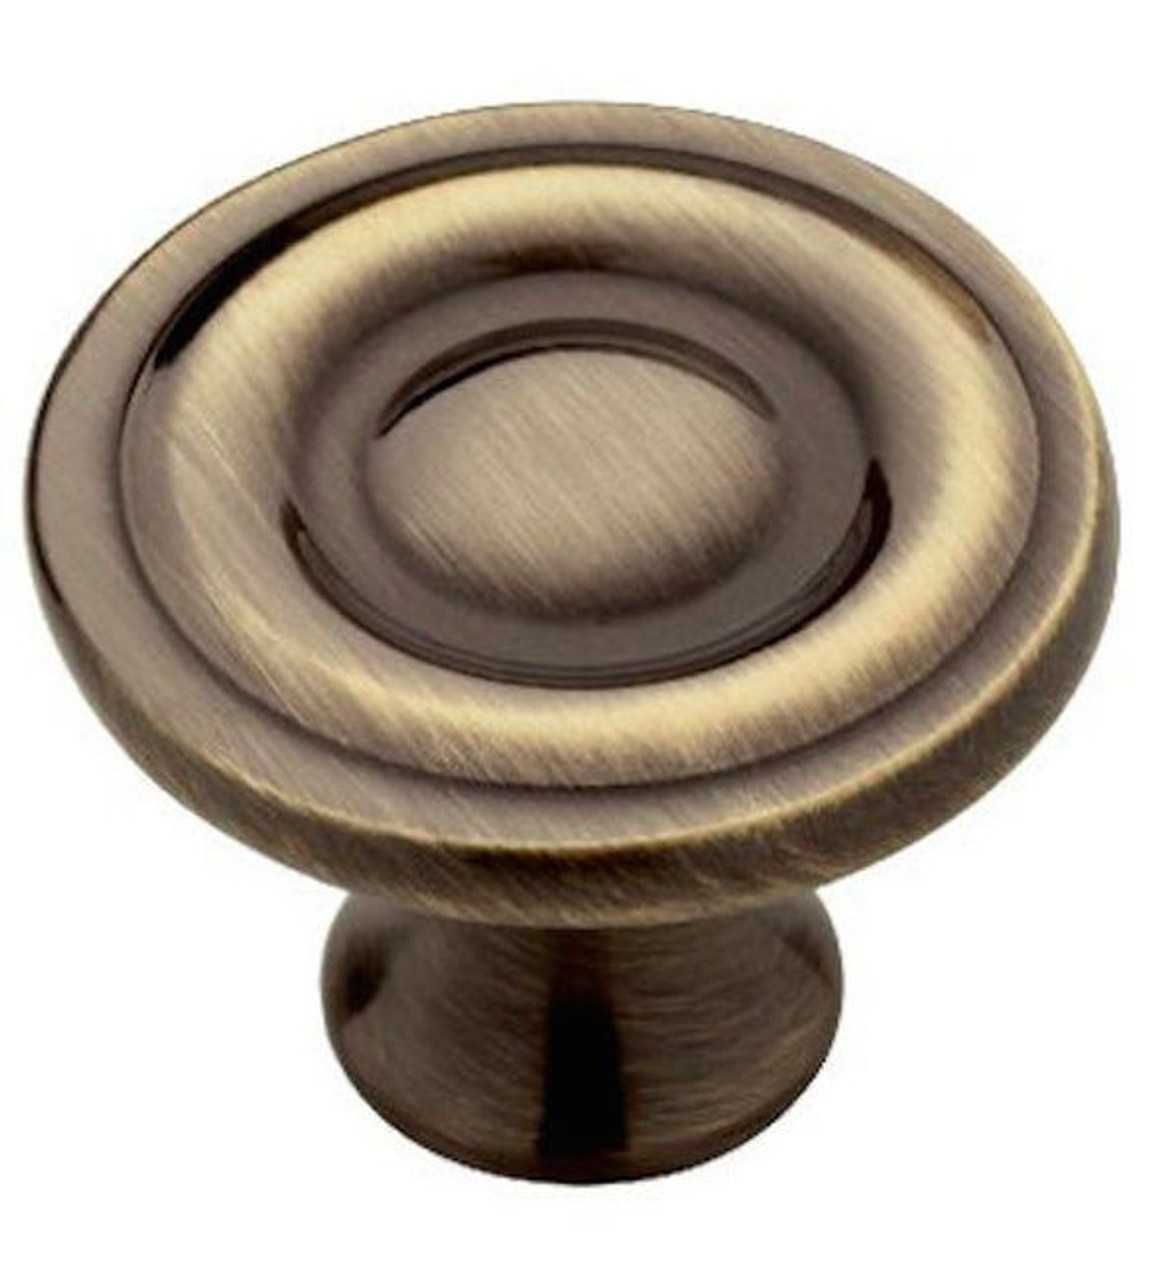 P50141-AB Round Ring Antique Brass Cabinet Drawer Pull Knob 10 Pack